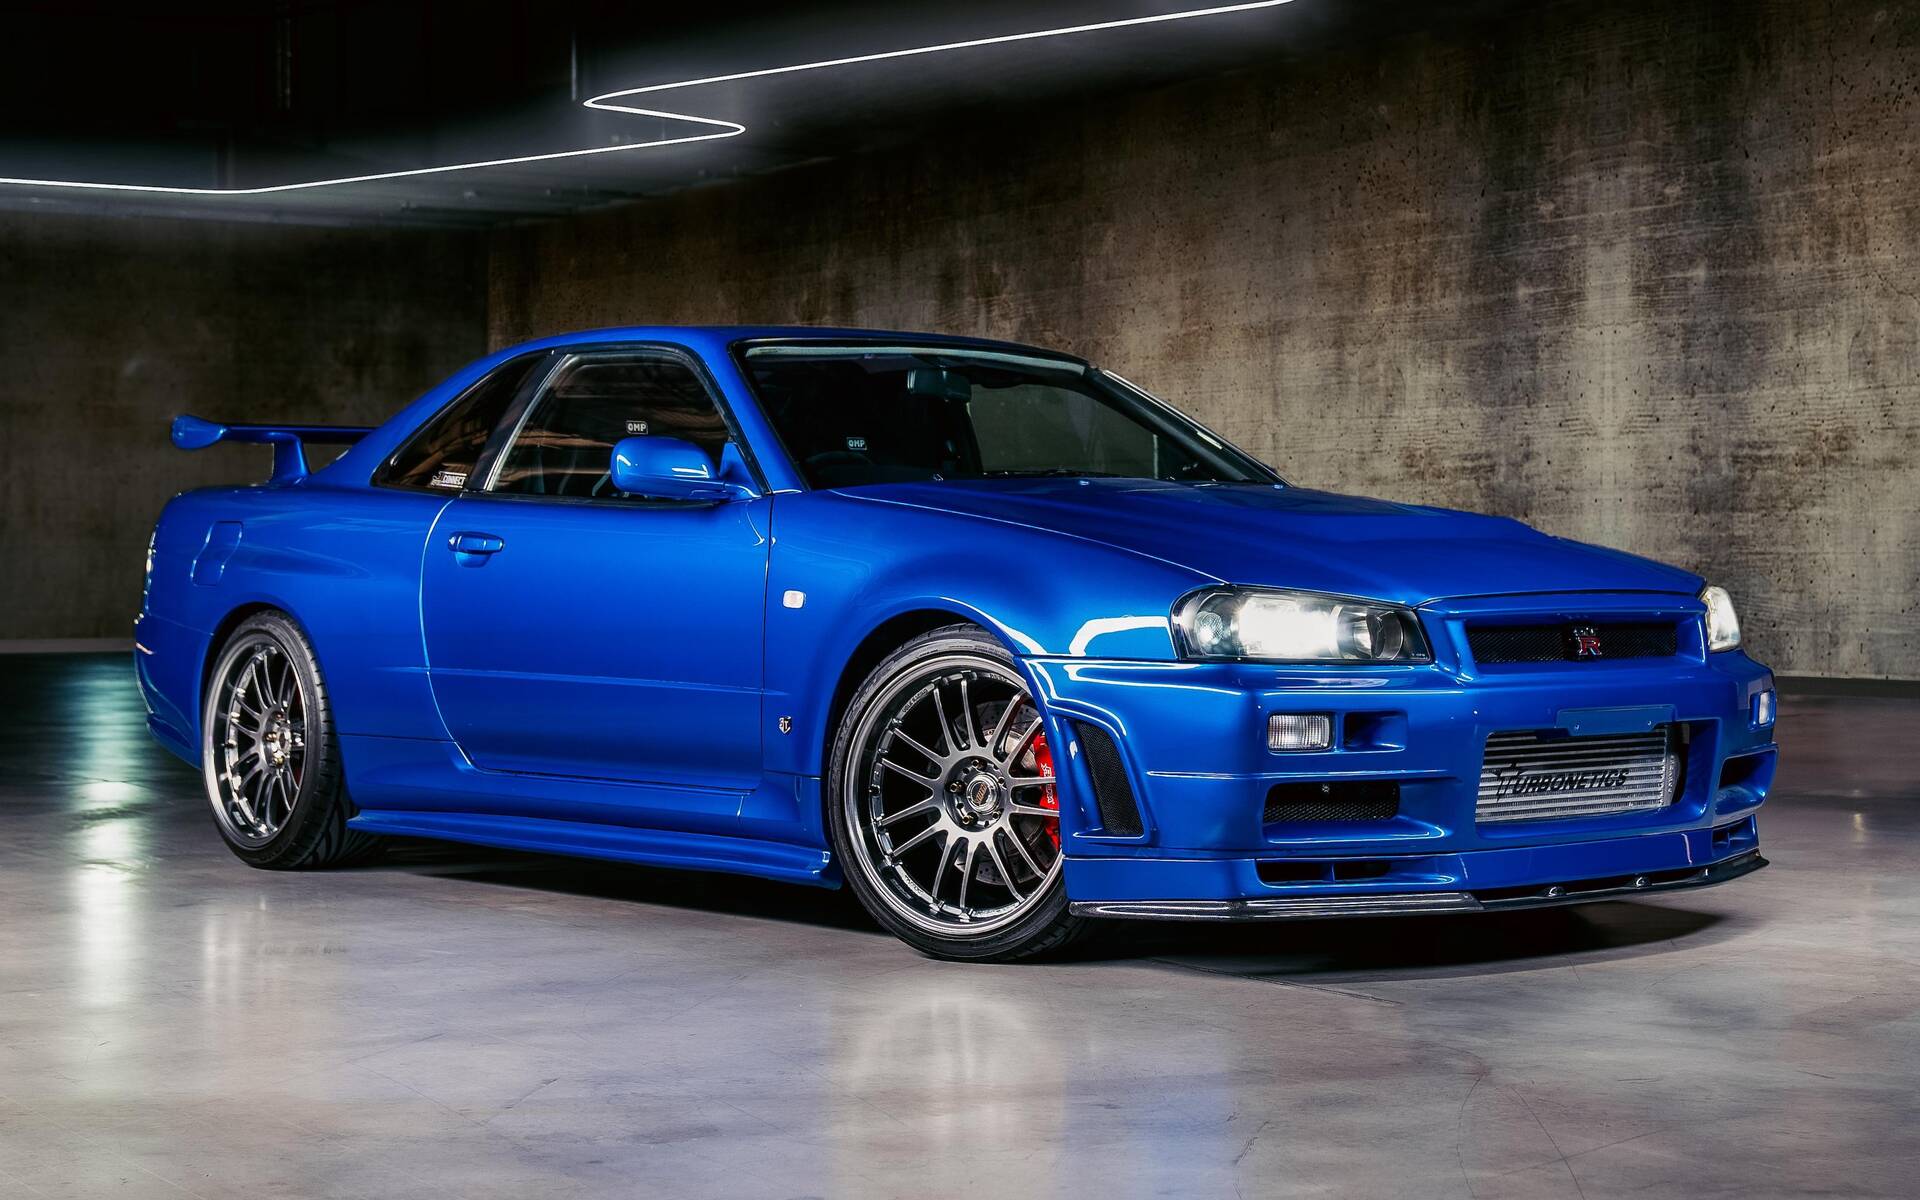 Paul Walker-Driven Nissan Skyline GT-R from “Fast and Furious 4